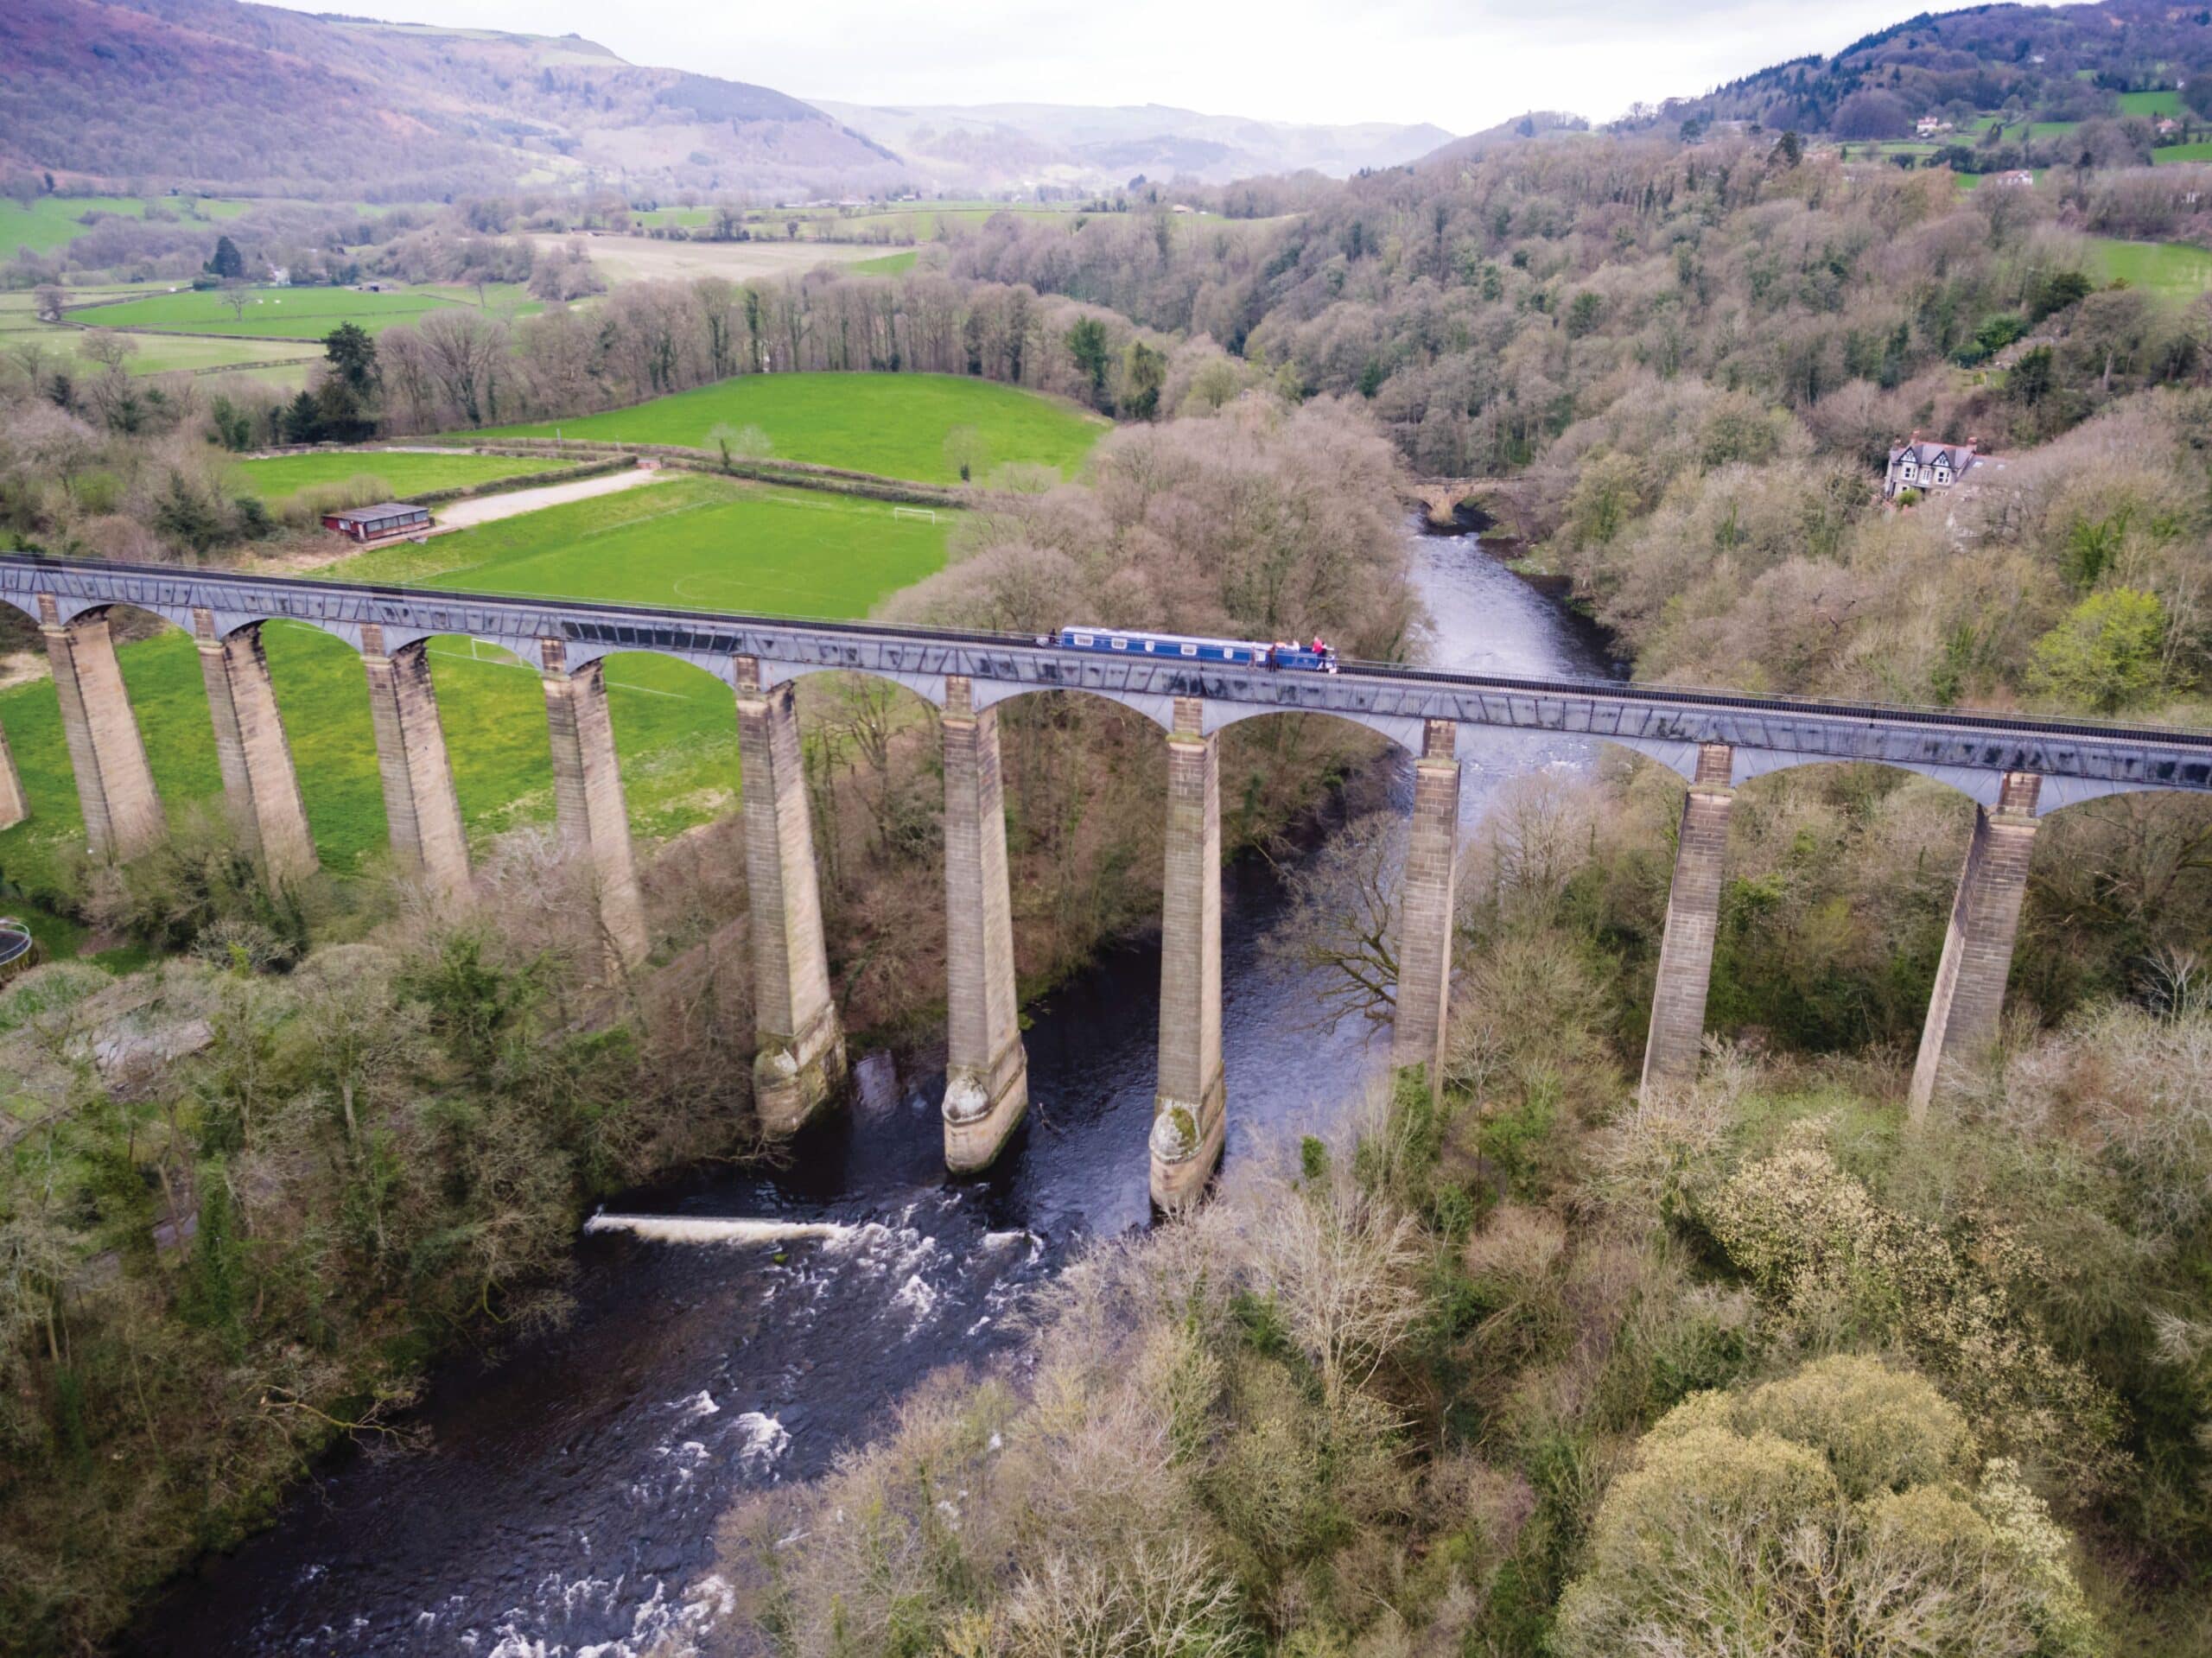 Pontcysyllte Aqueduct on the Llangollen Canal in North Wales